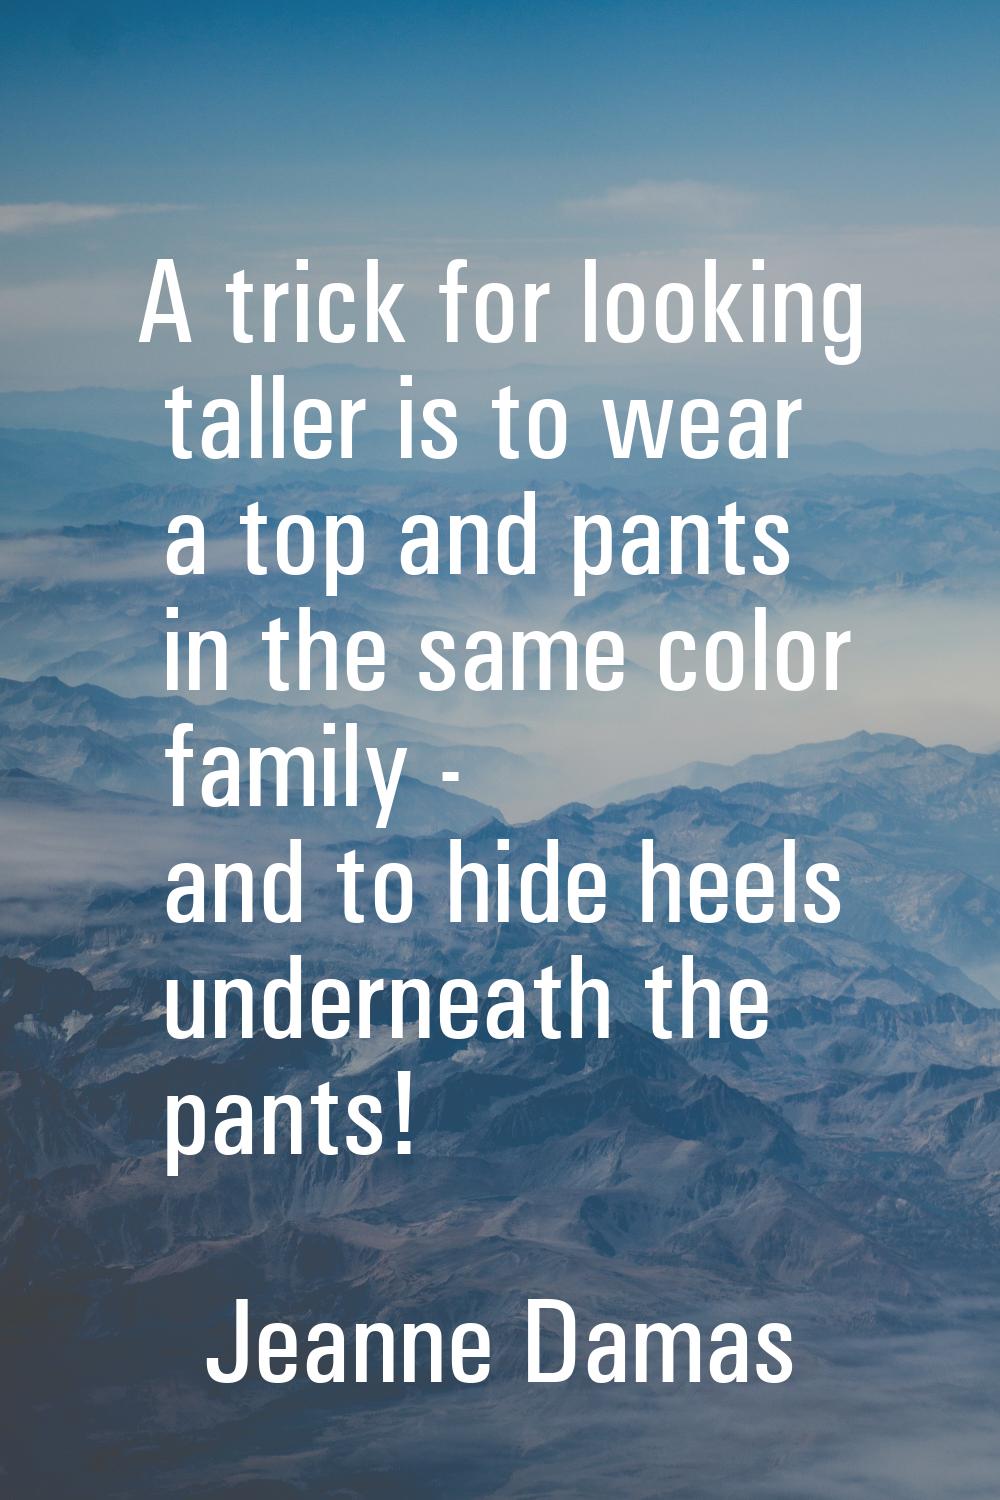 A trick for looking taller is to wear a top and pants in the same color family - and to hide heels 